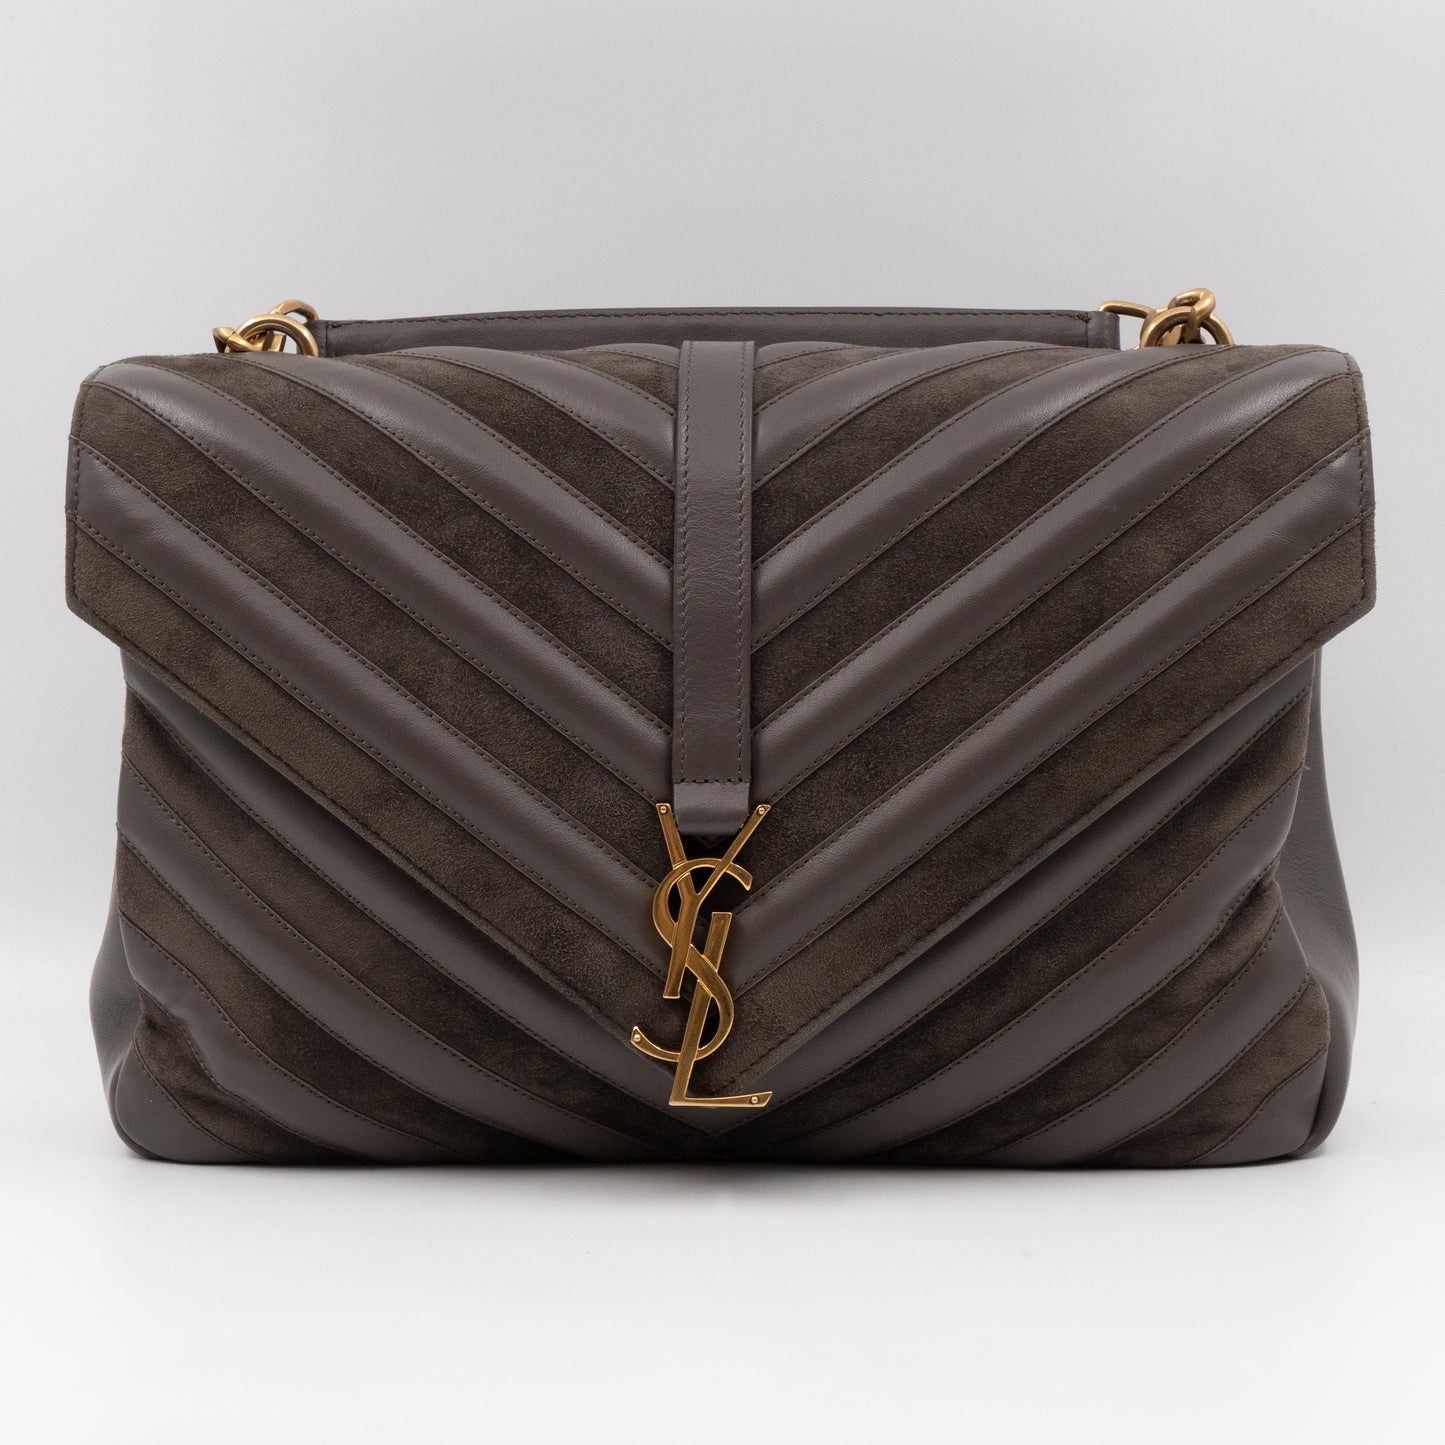 College Large Chevron Quilted Gray Suede Leather